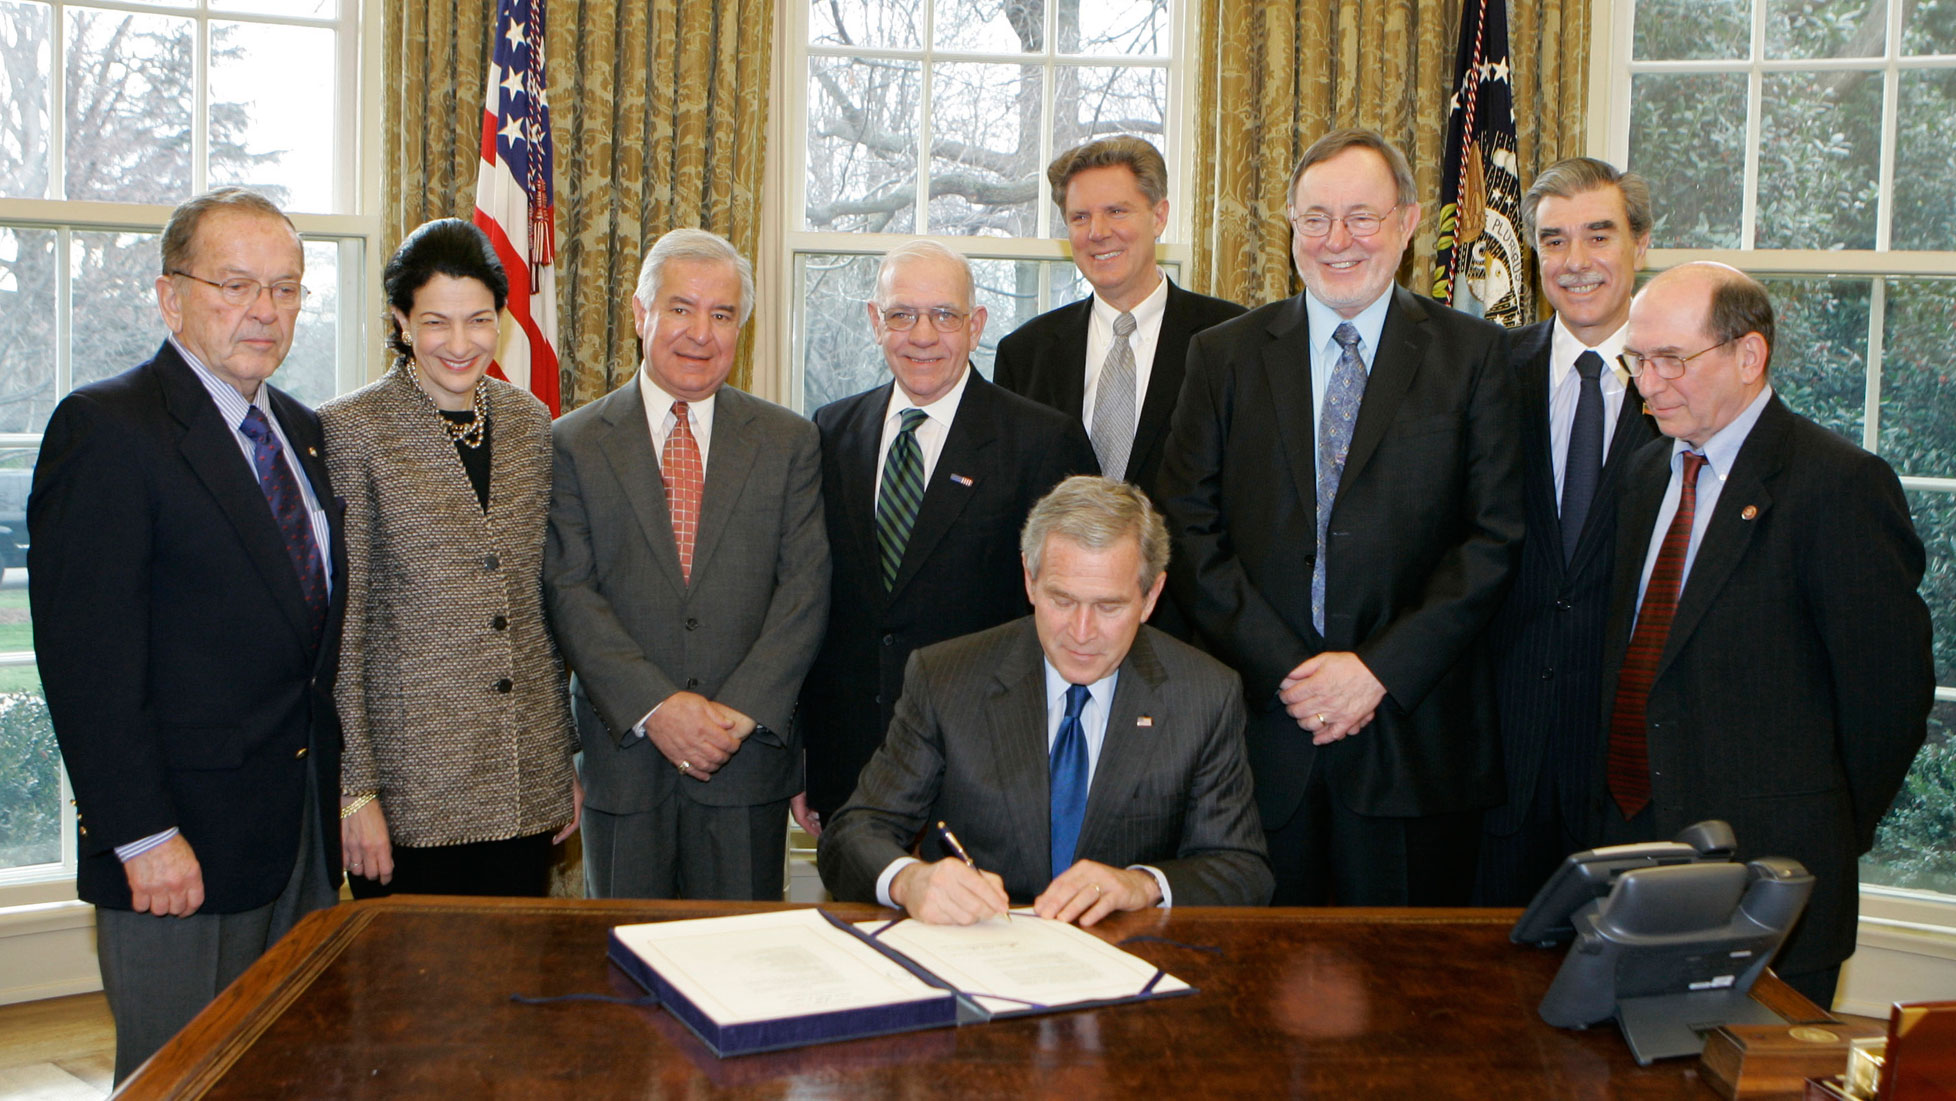 President Bush signs the Magnuson-Stevens Fishery Conservation and Management Reauthorization Act of 2006, Friday, Jan. 12, 2007 in the Oval Office of the White House in Washington.